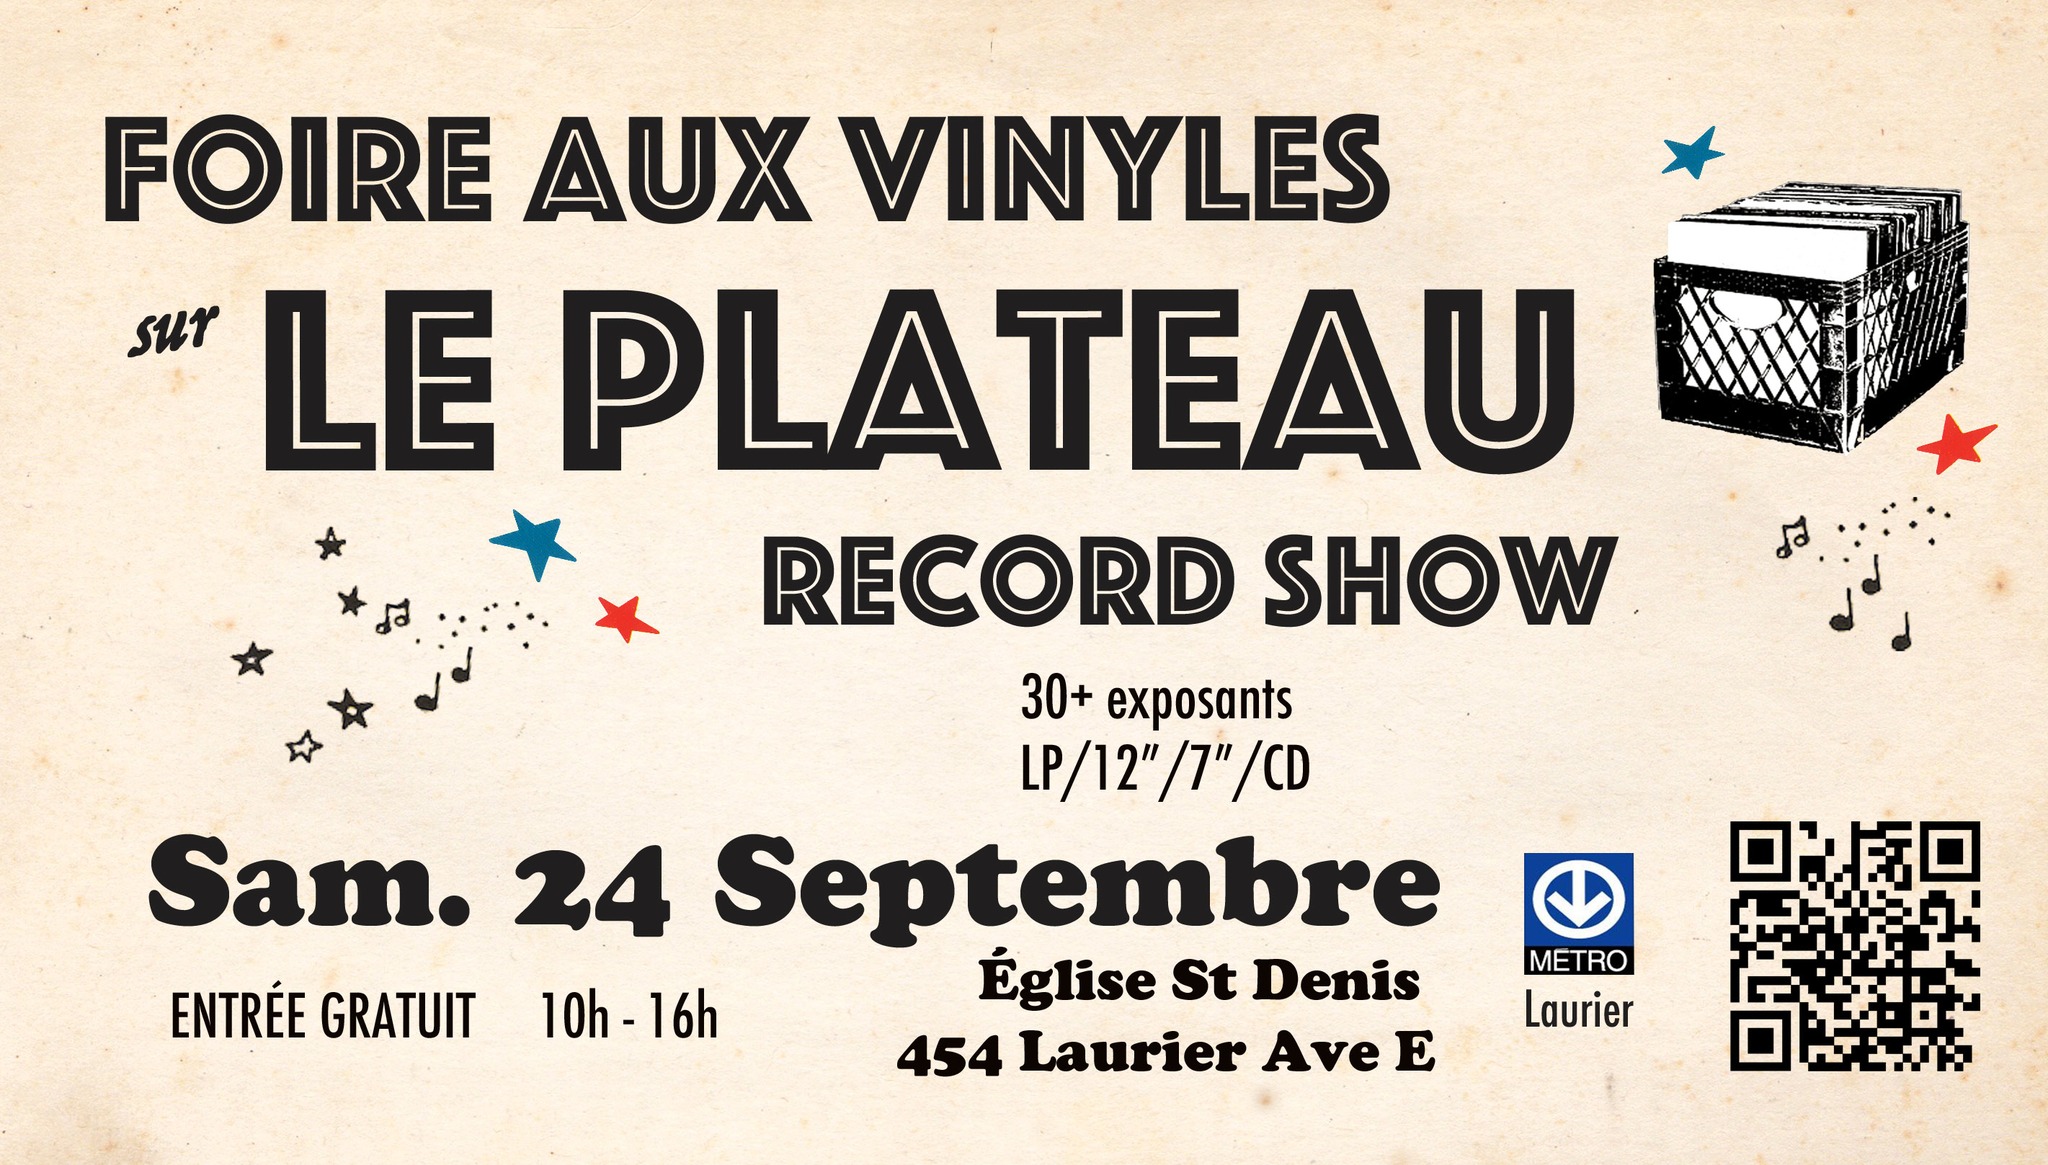 Thousands of records are for sale at le Plateau Record Show on Saturday